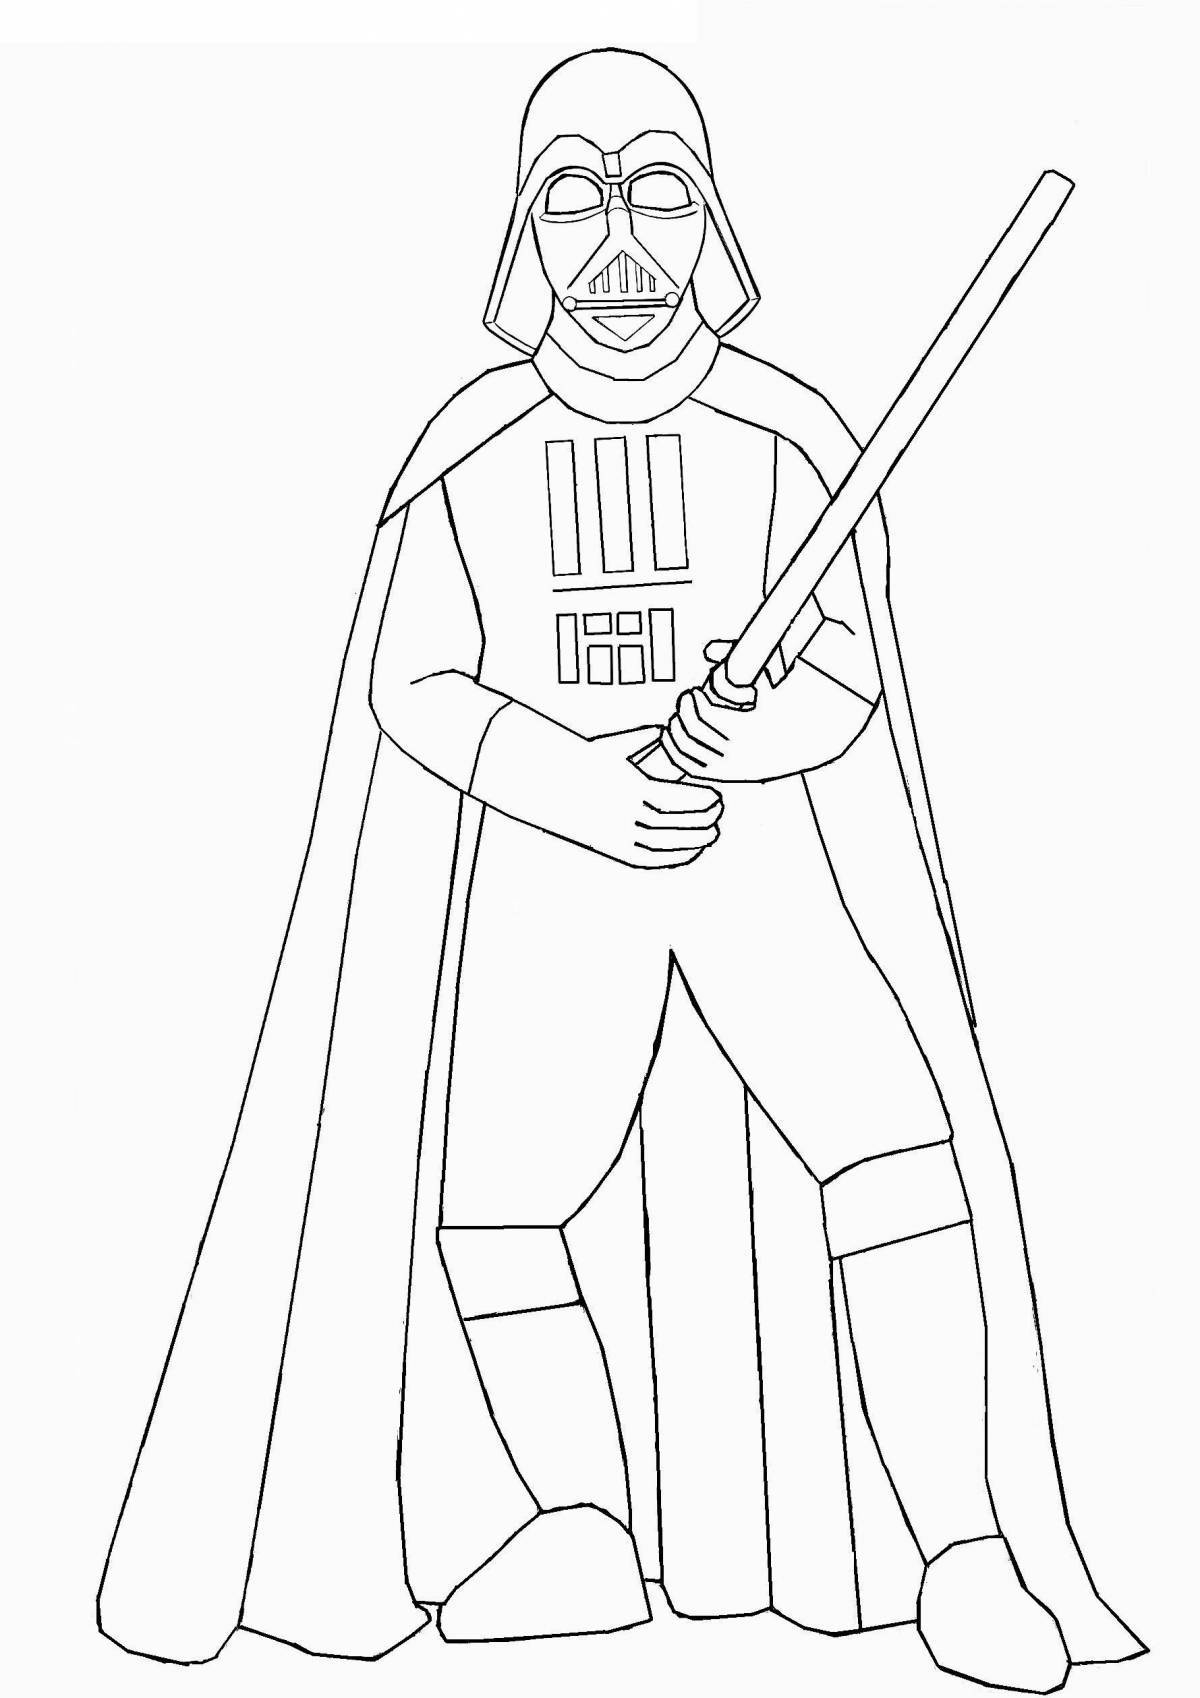 Gorgeous darth vader coloring book